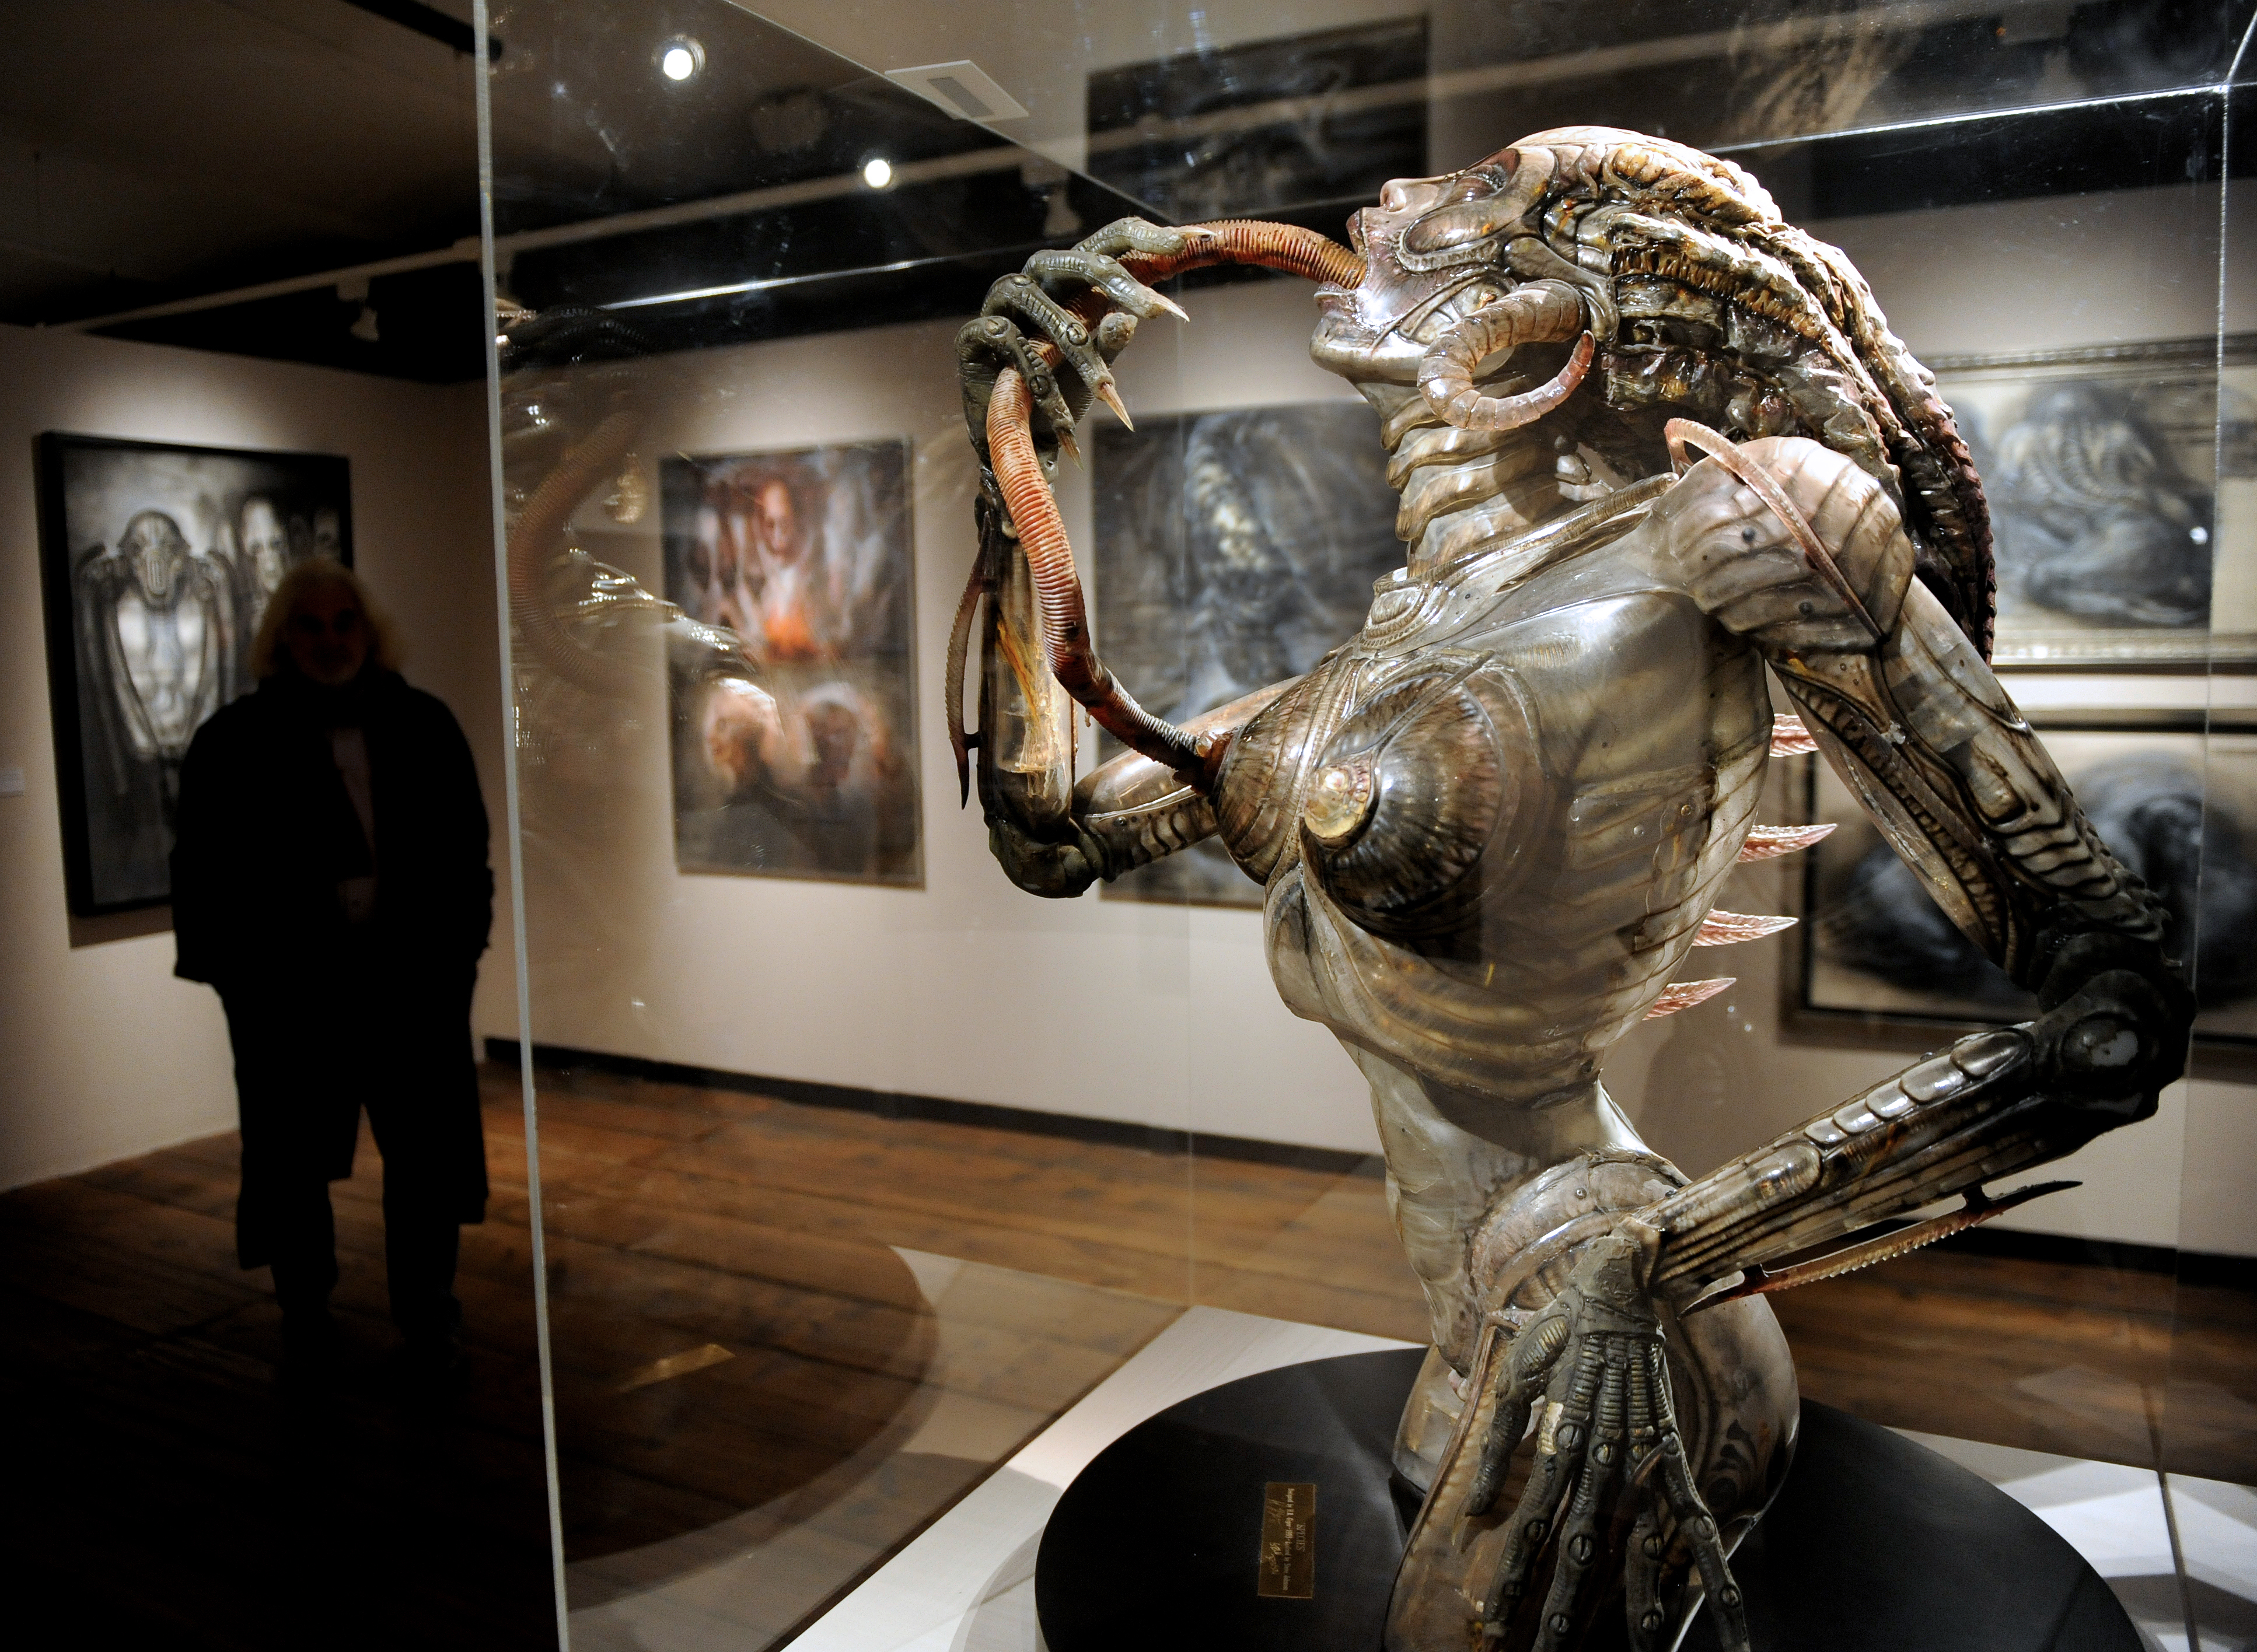 HR Giger's exhibition 'Traeume und Visionen' (Dreams and Visions) at the Kunsthaus Wien in Vienna on March 8, 2011.